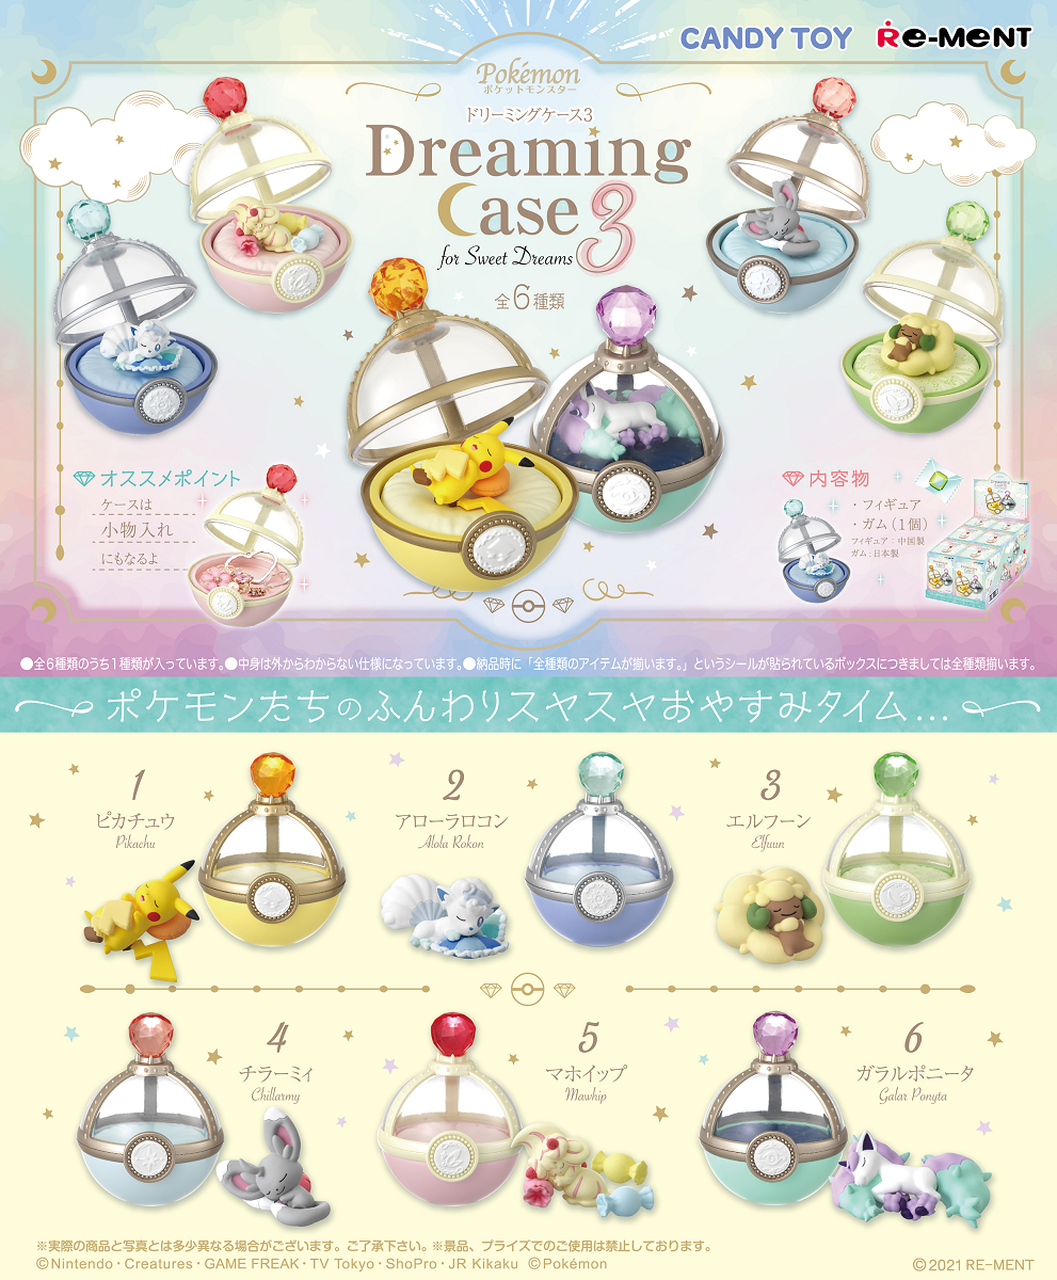 Re-Ment Pokemon Dreaming Case for Sweet Dreams (Vol 3) Trading Figures Box Set of 6